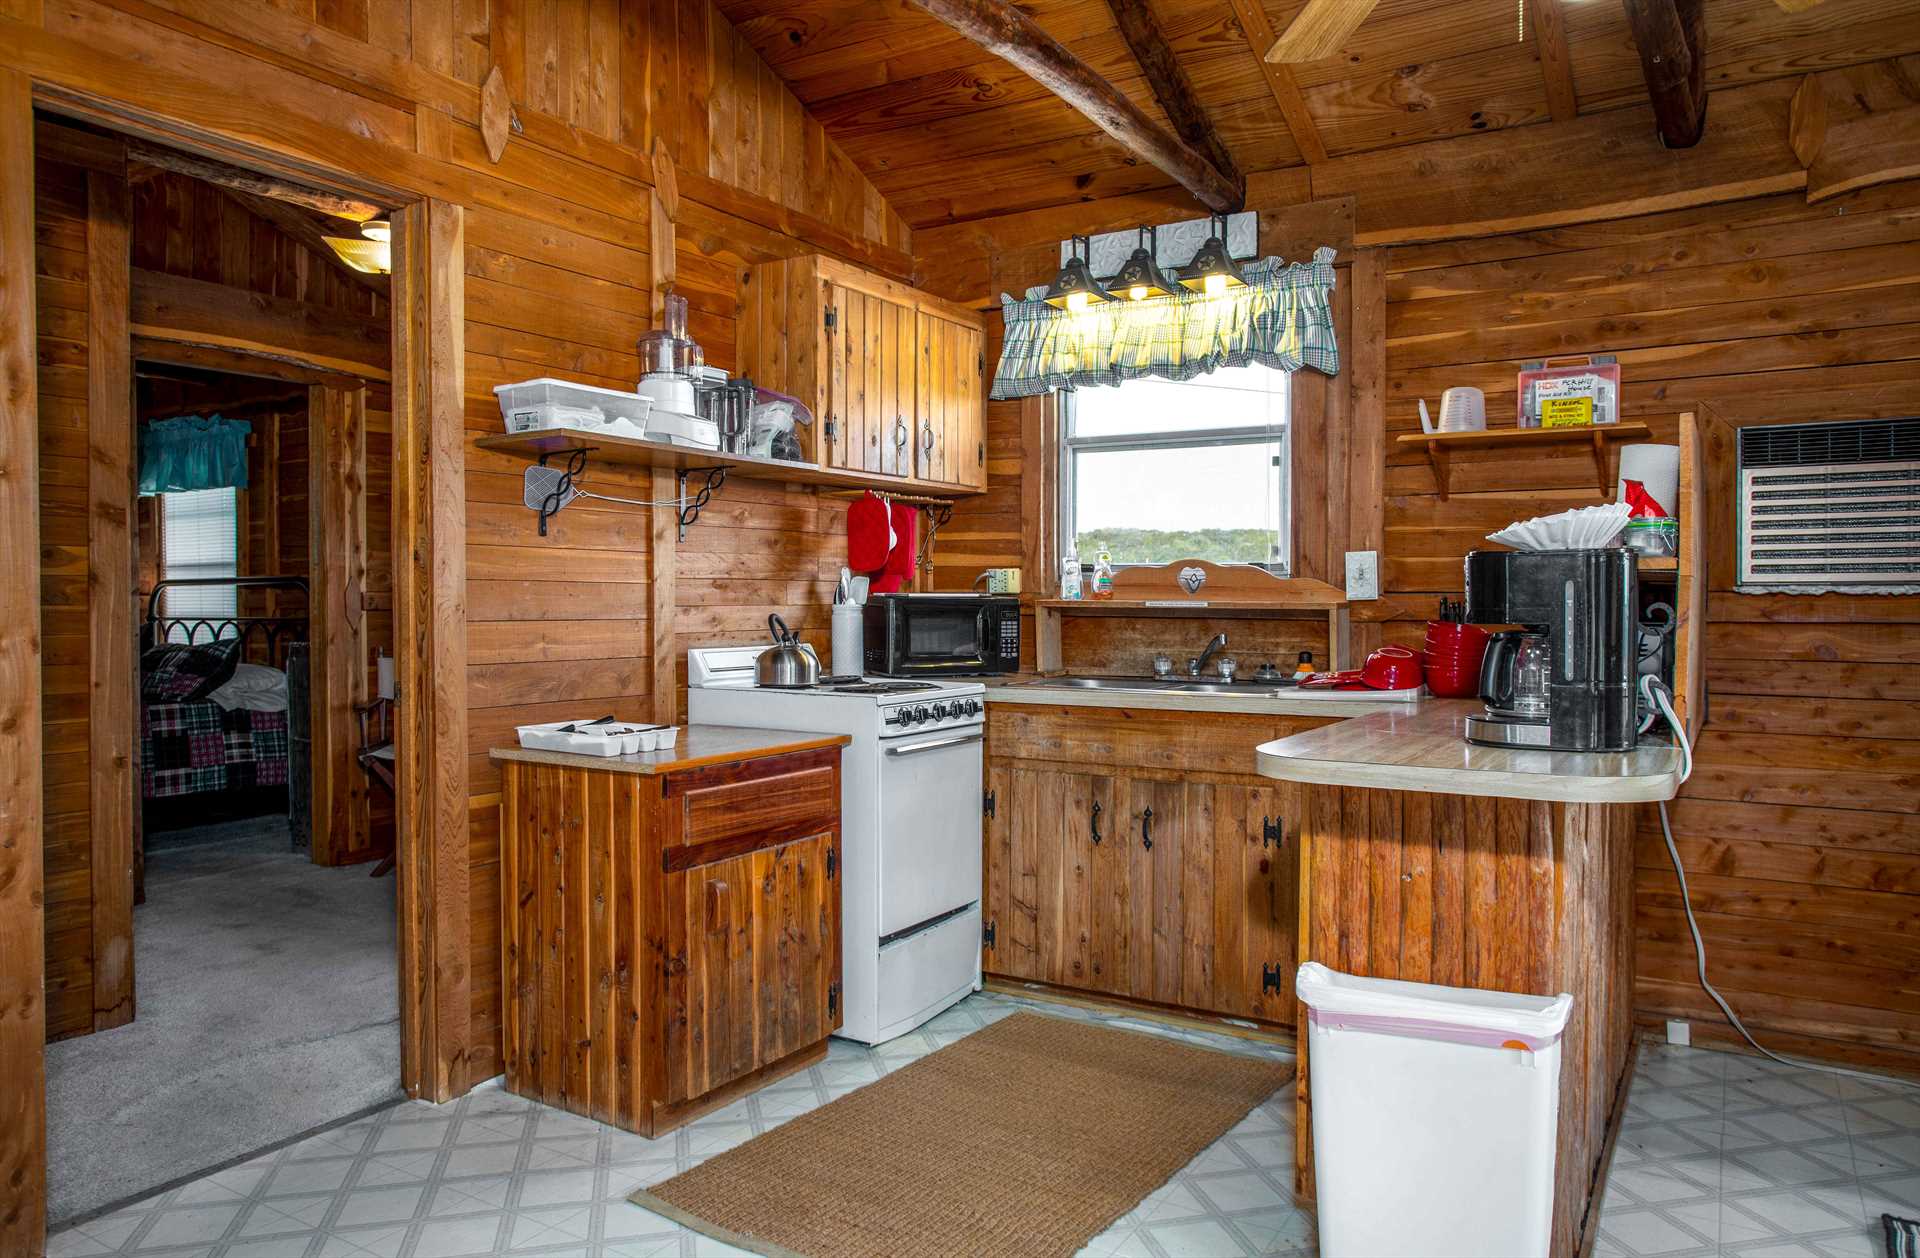                                                 The Hill House's cozy and full country kitchen has all the appliances and cooking and serving ware you'll need! Keep in mind even larger gatherings can take advantage of the Homestead's kitchen, too.